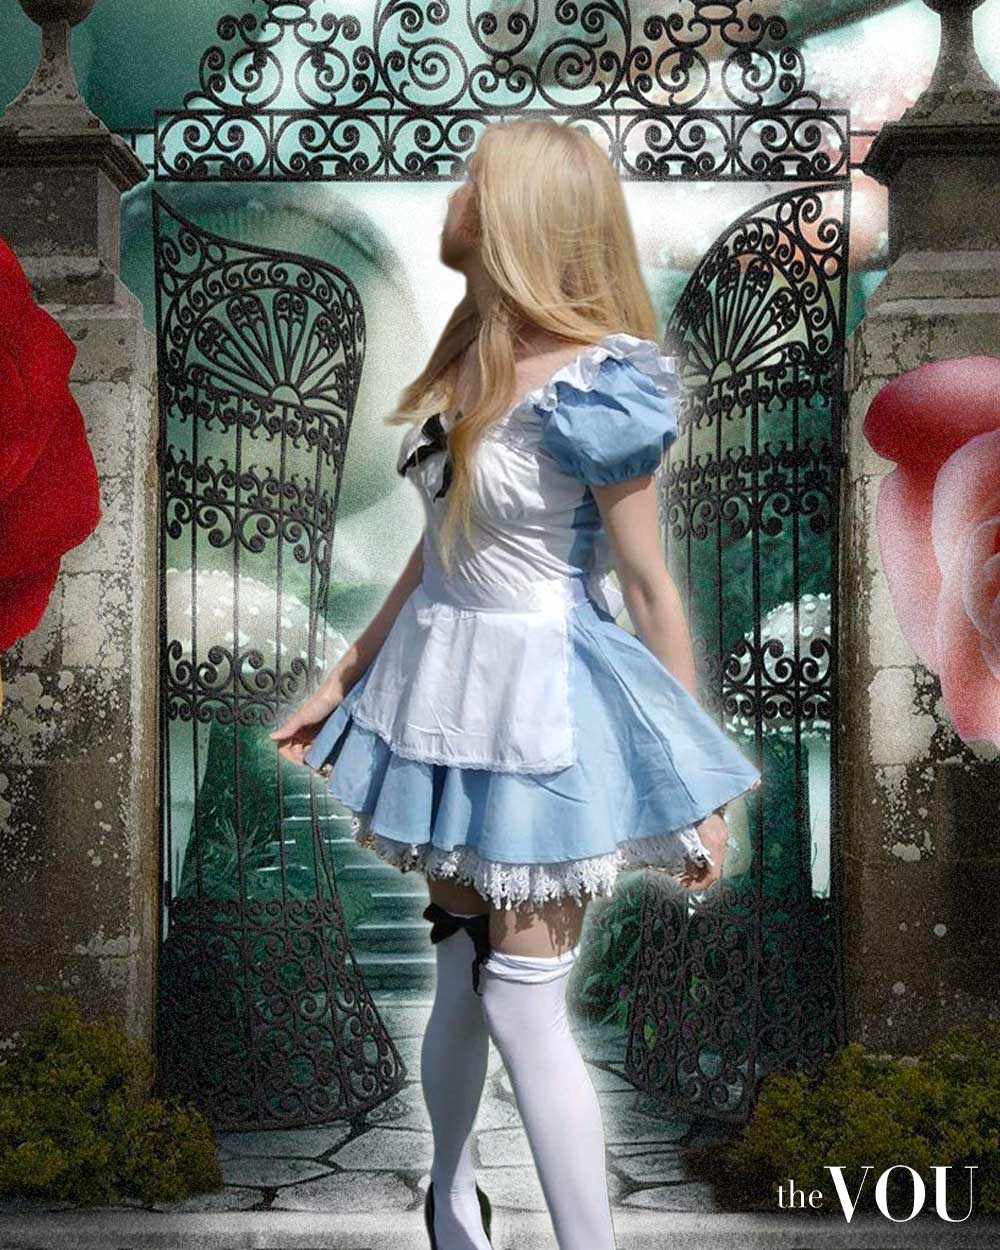 Alice in Wonderland Dreamcore Outfit: Lolita Dress, White Stockings, and High Heels